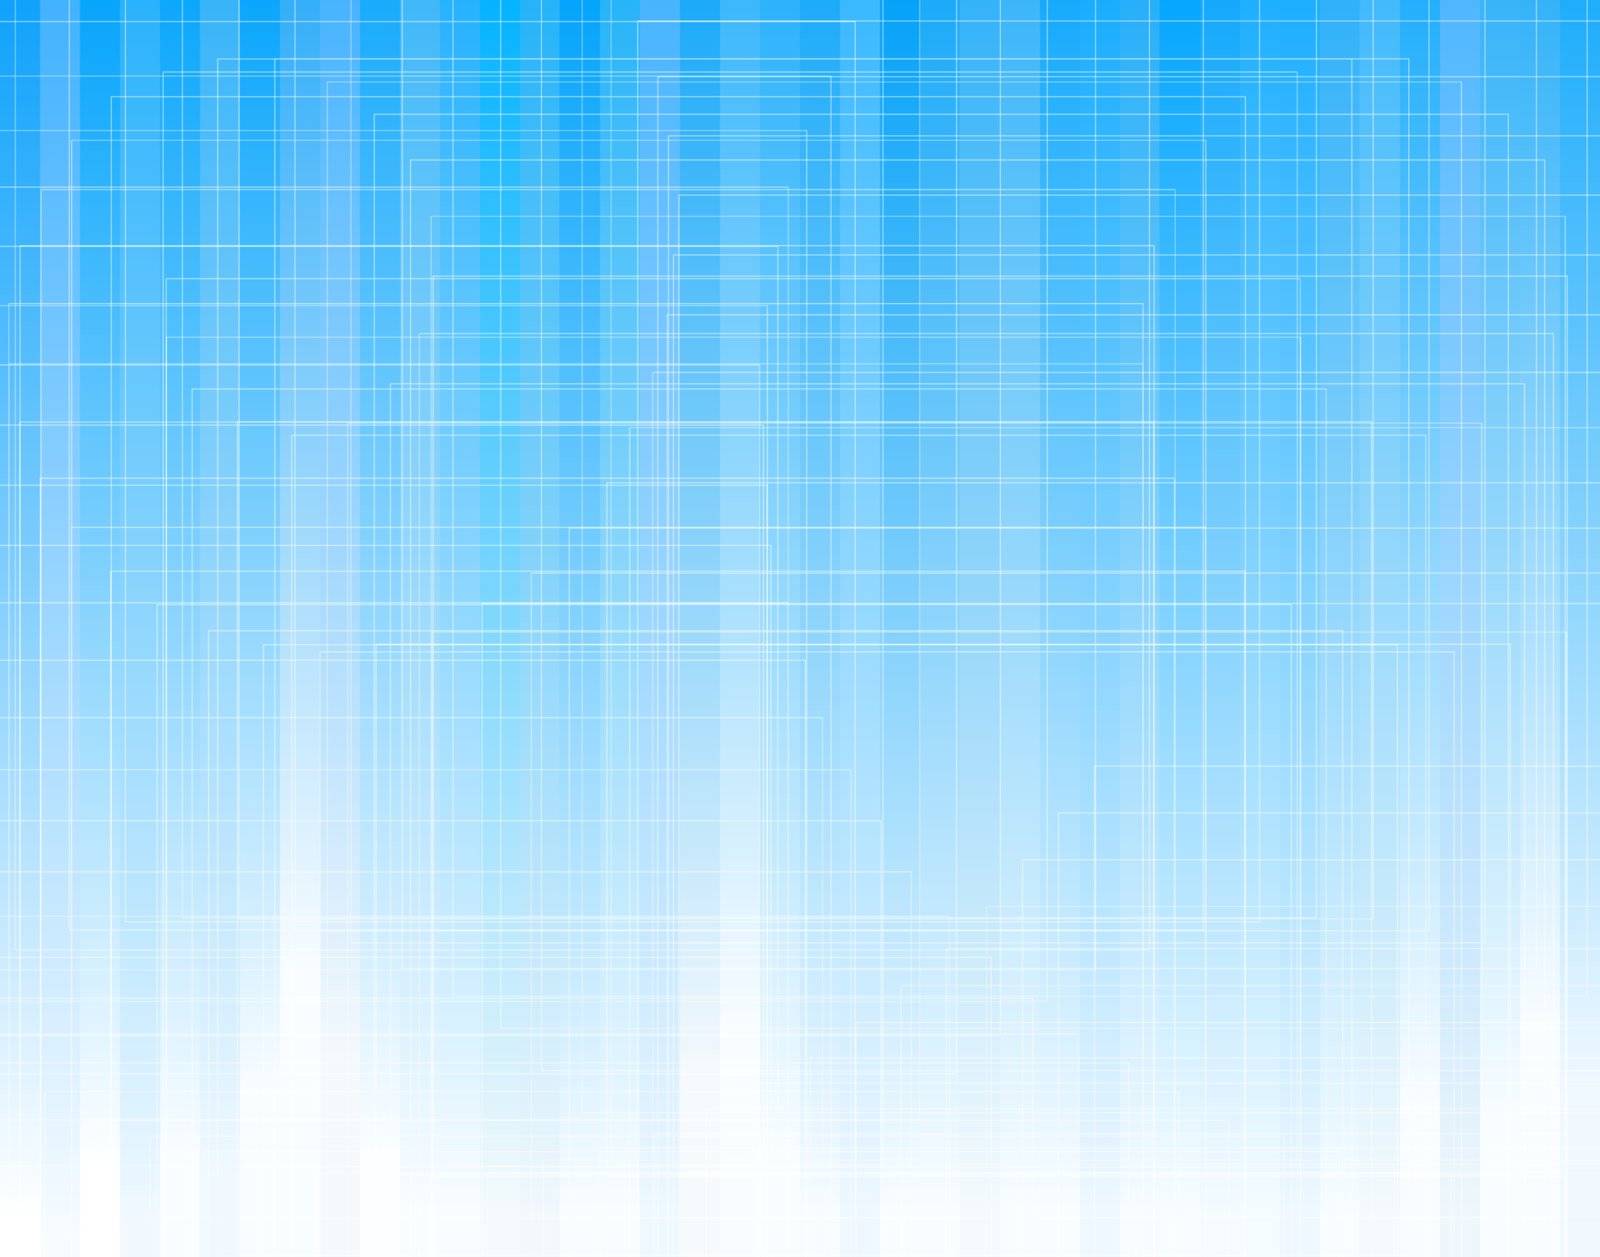 Abstract editable vector illustration of blue stripes with grid as separate object